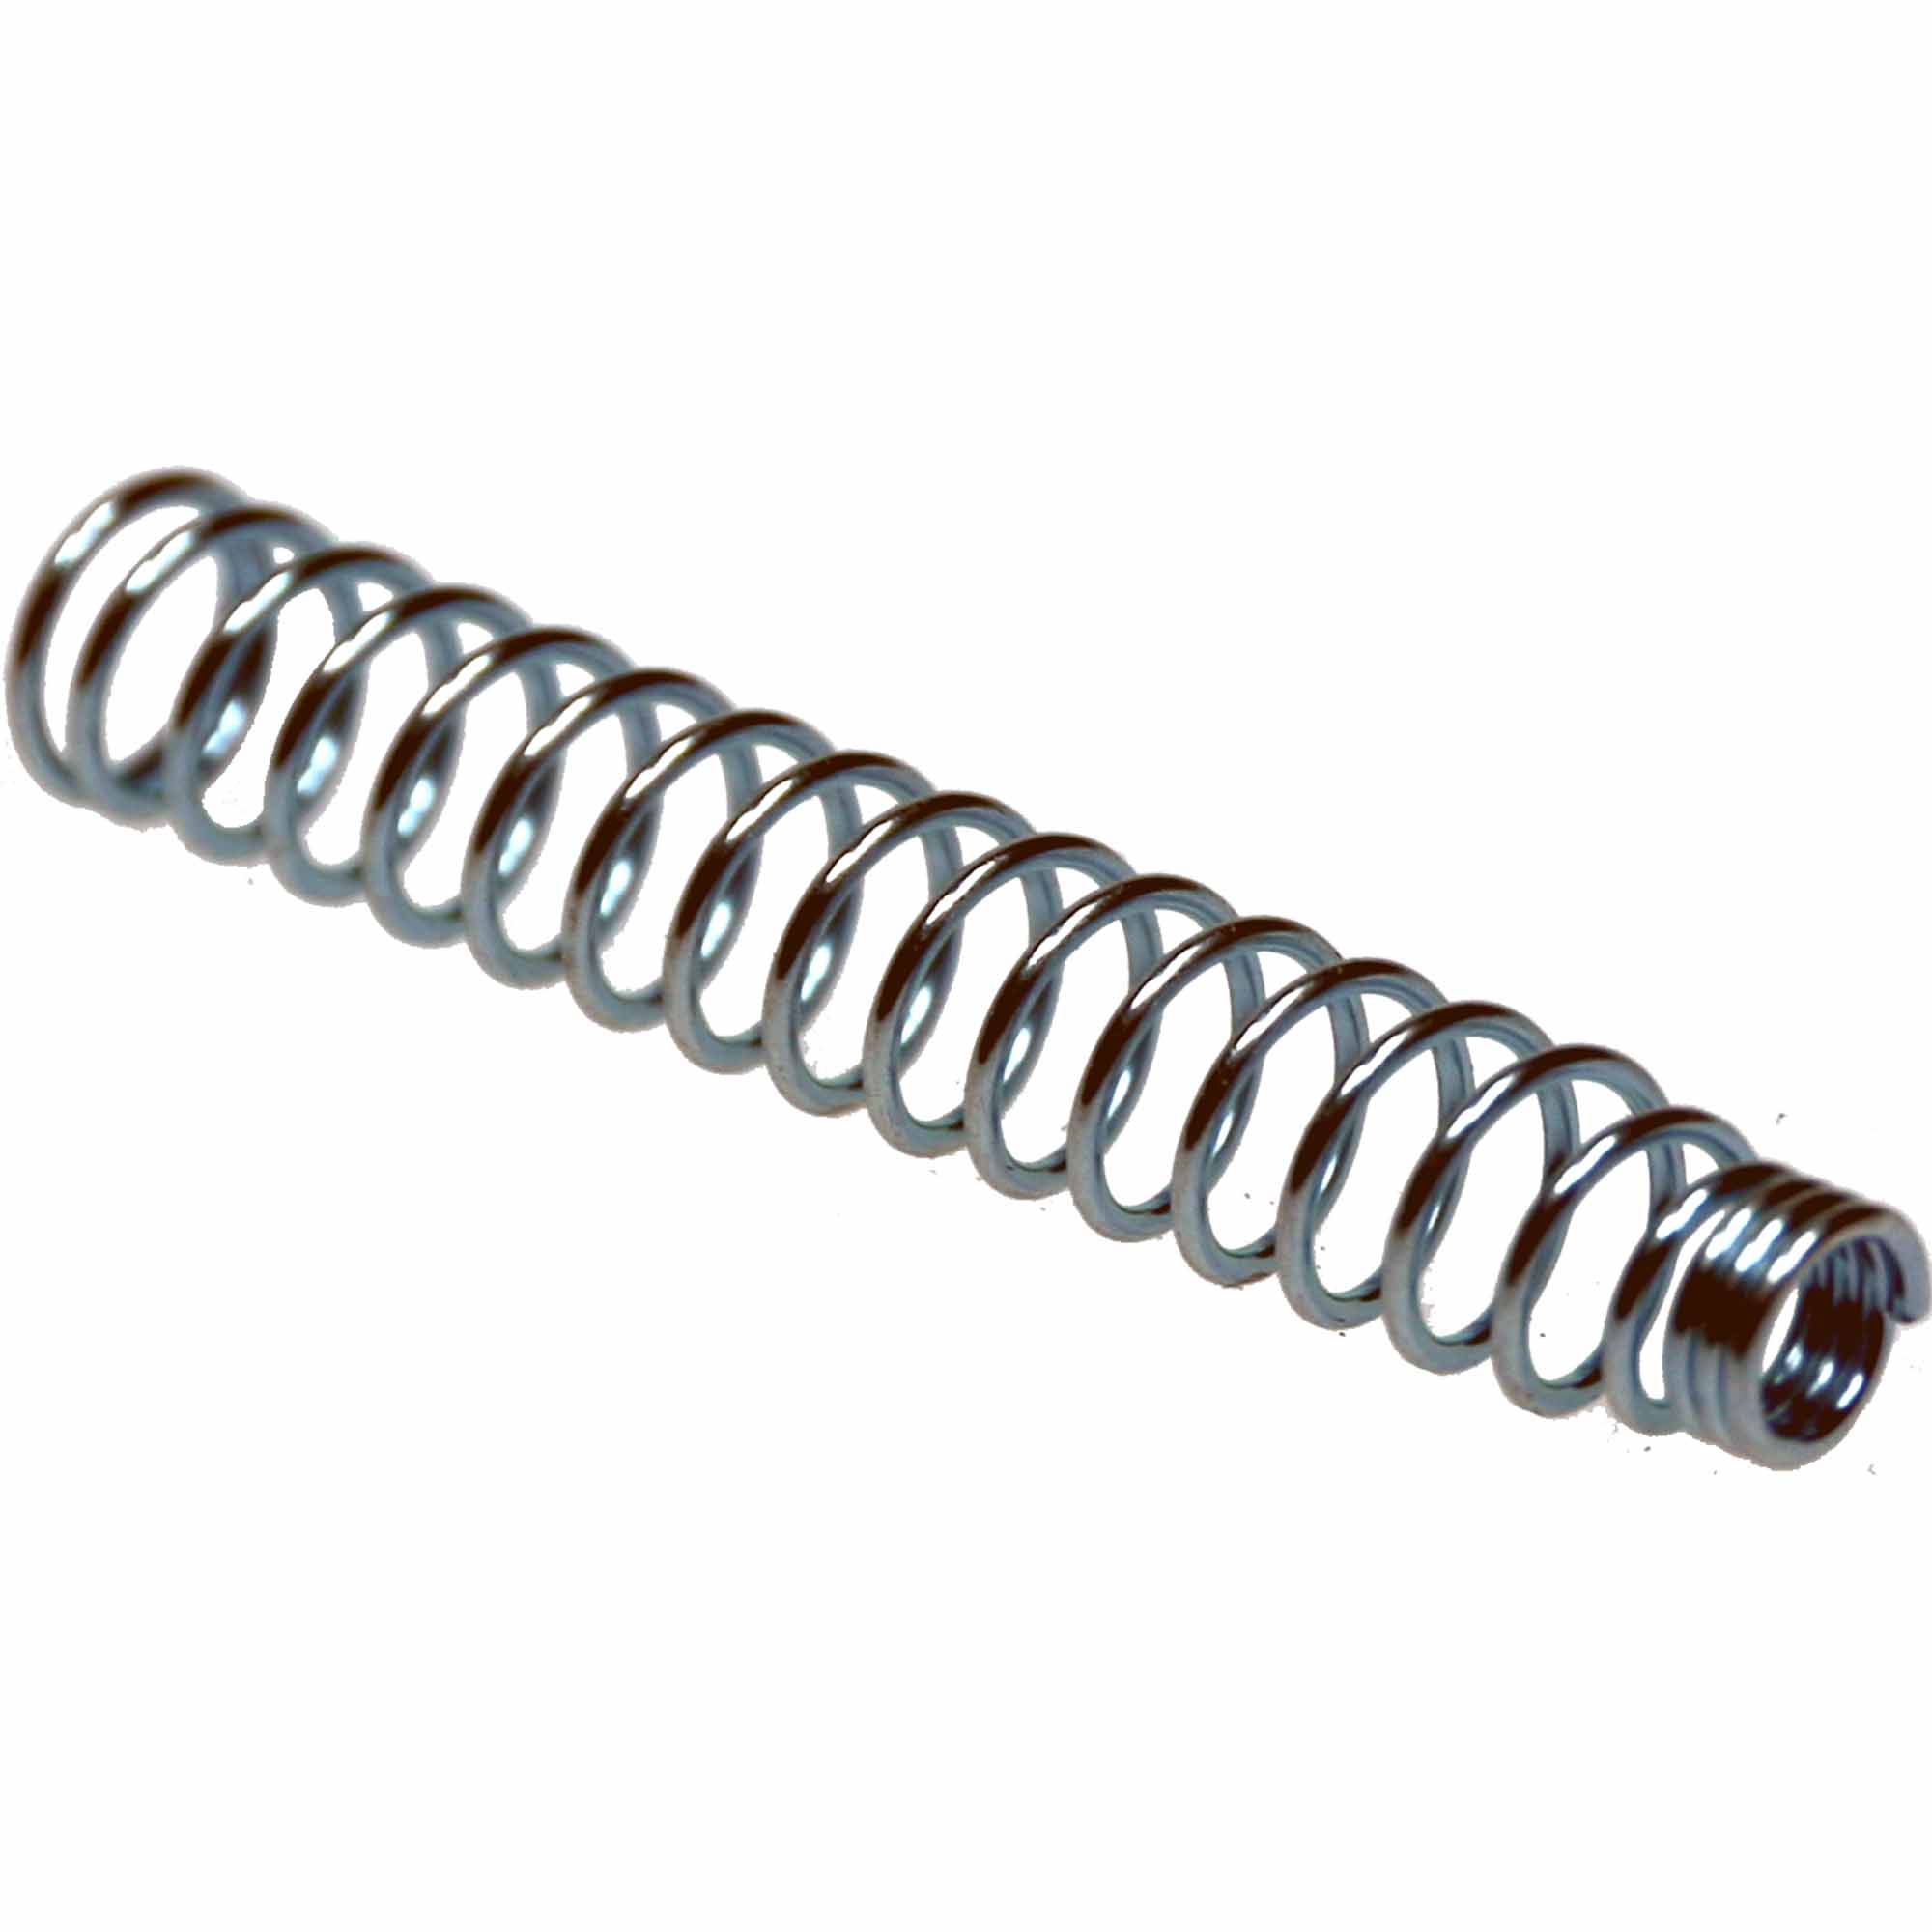 DLX Luxe ICE-1.0 Bolt Spring